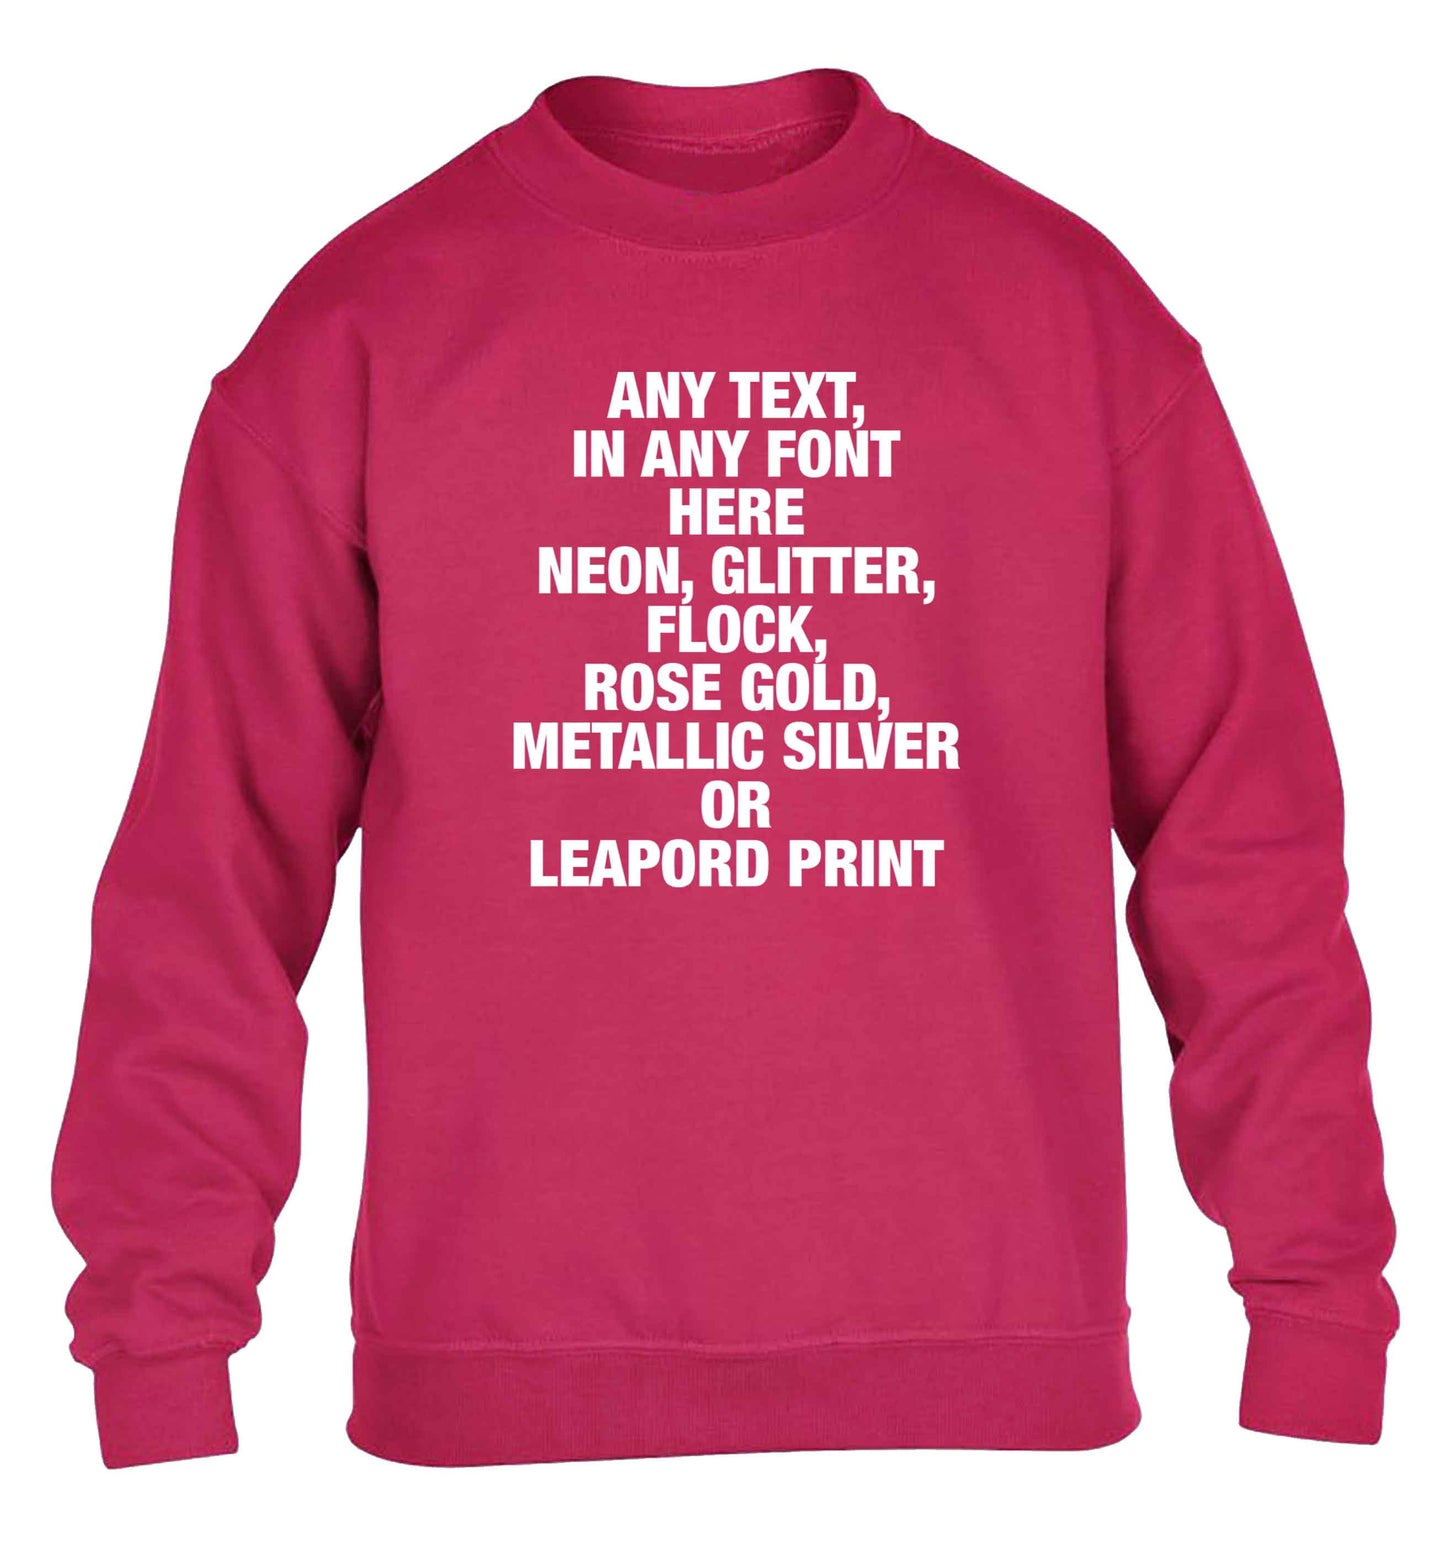 Premium custom order any text colour and font children's pink sweater 12-13 Years